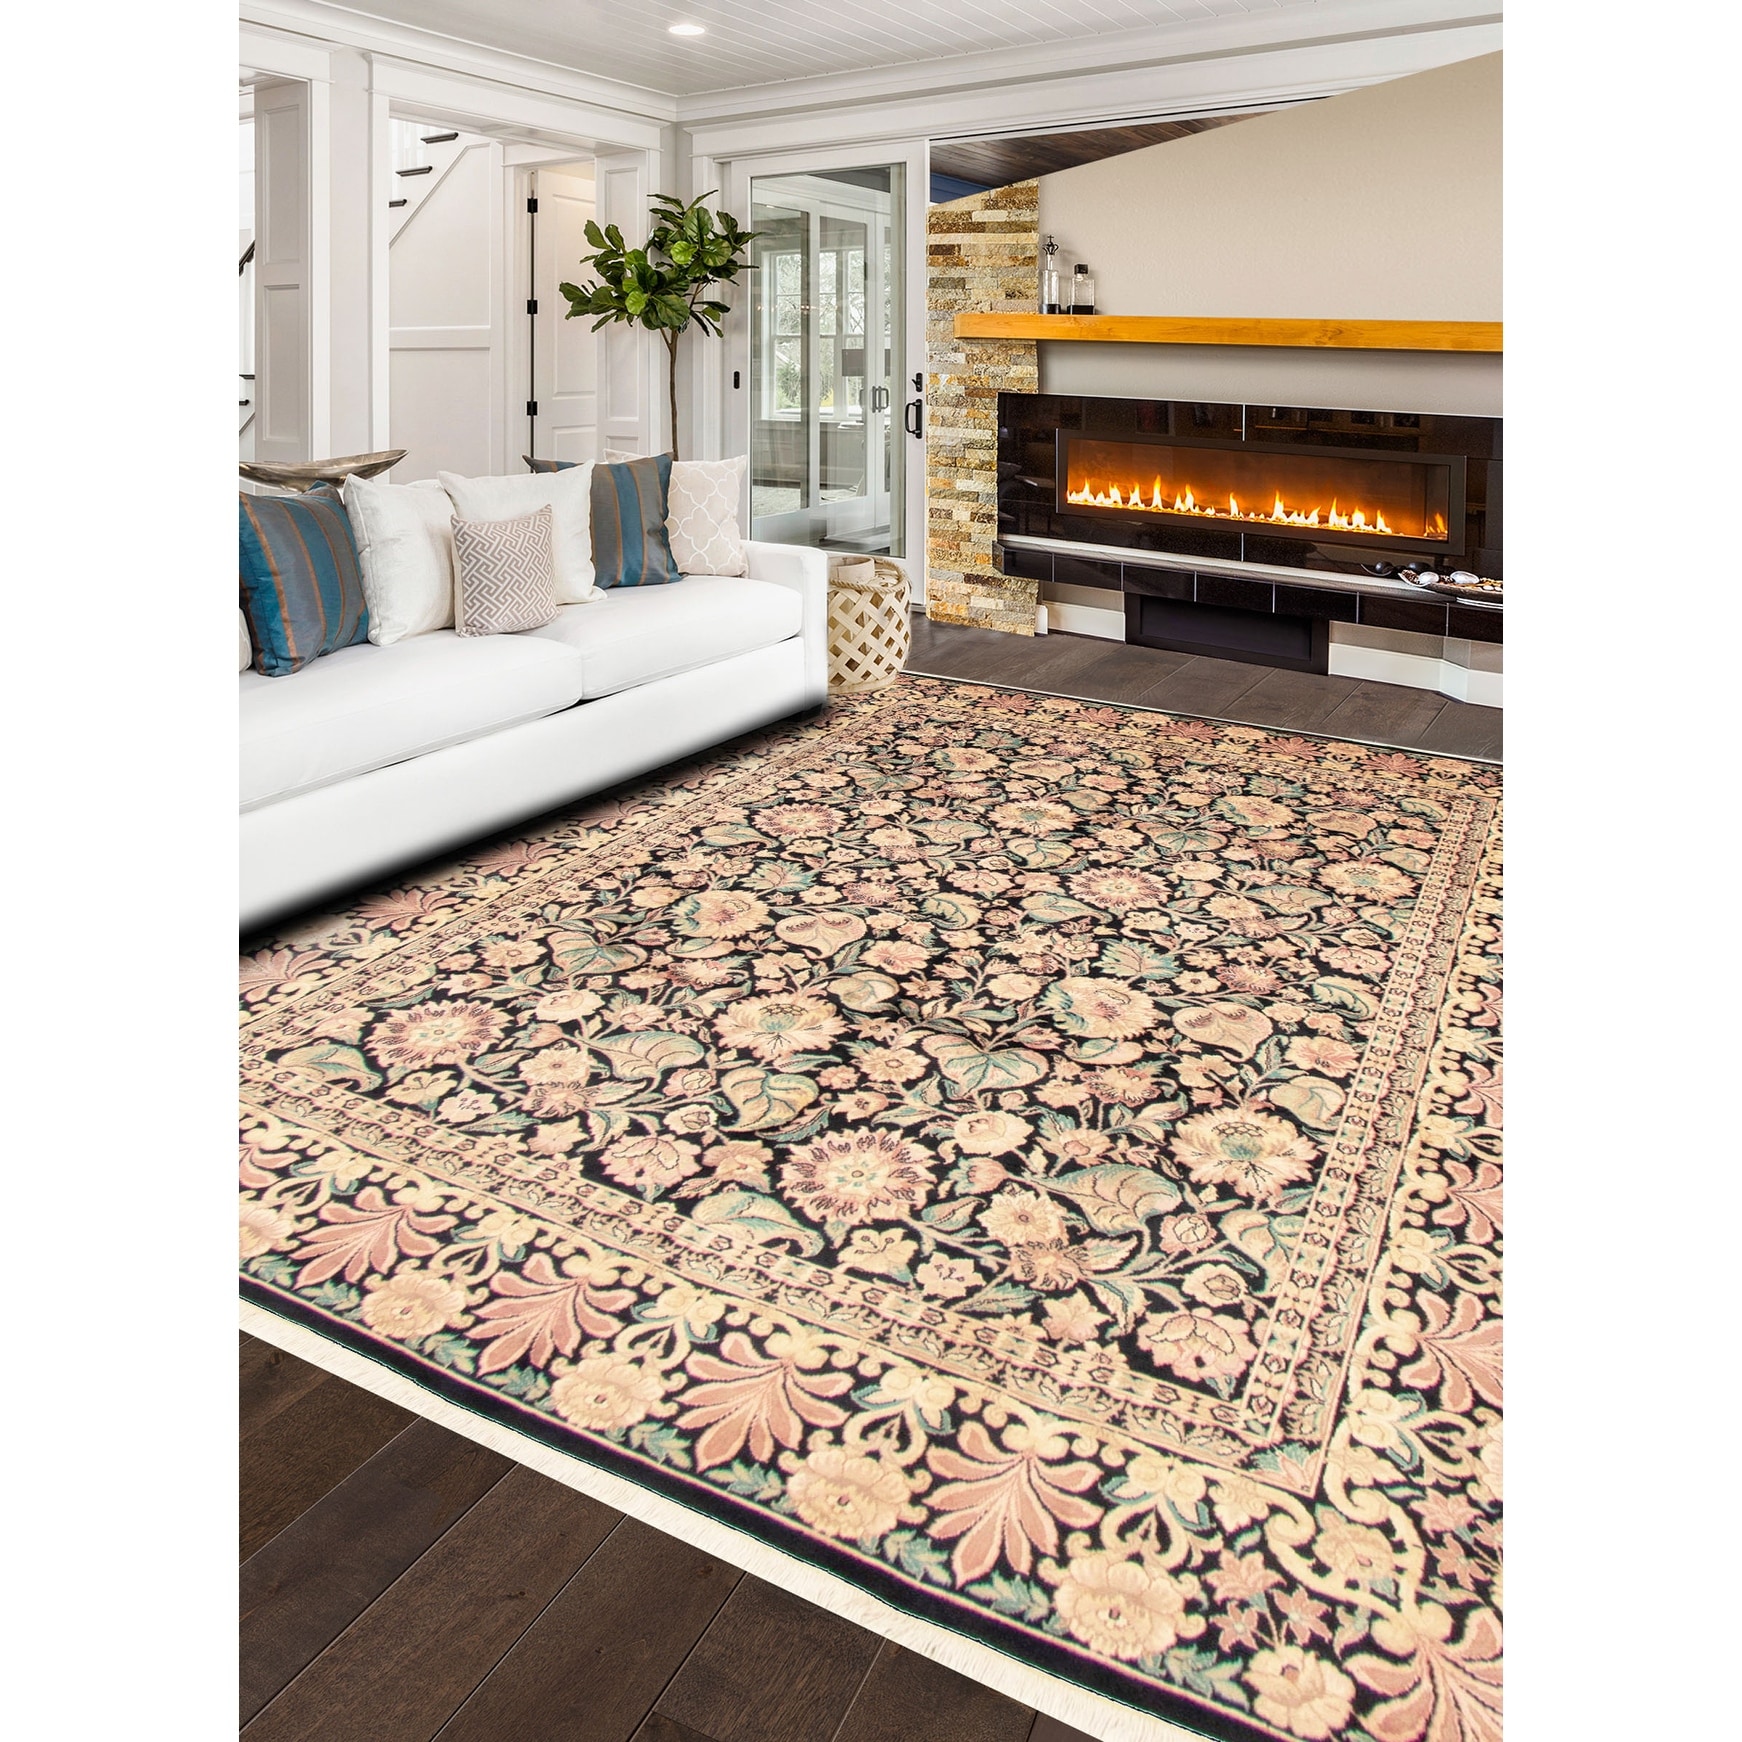 Bedroom 310991 Signature Collection Floral Blue Rug 7'10 x 10'4 Hand-Knotted Wool Rug eCarpet Gallery Large Area Rug for Living Room